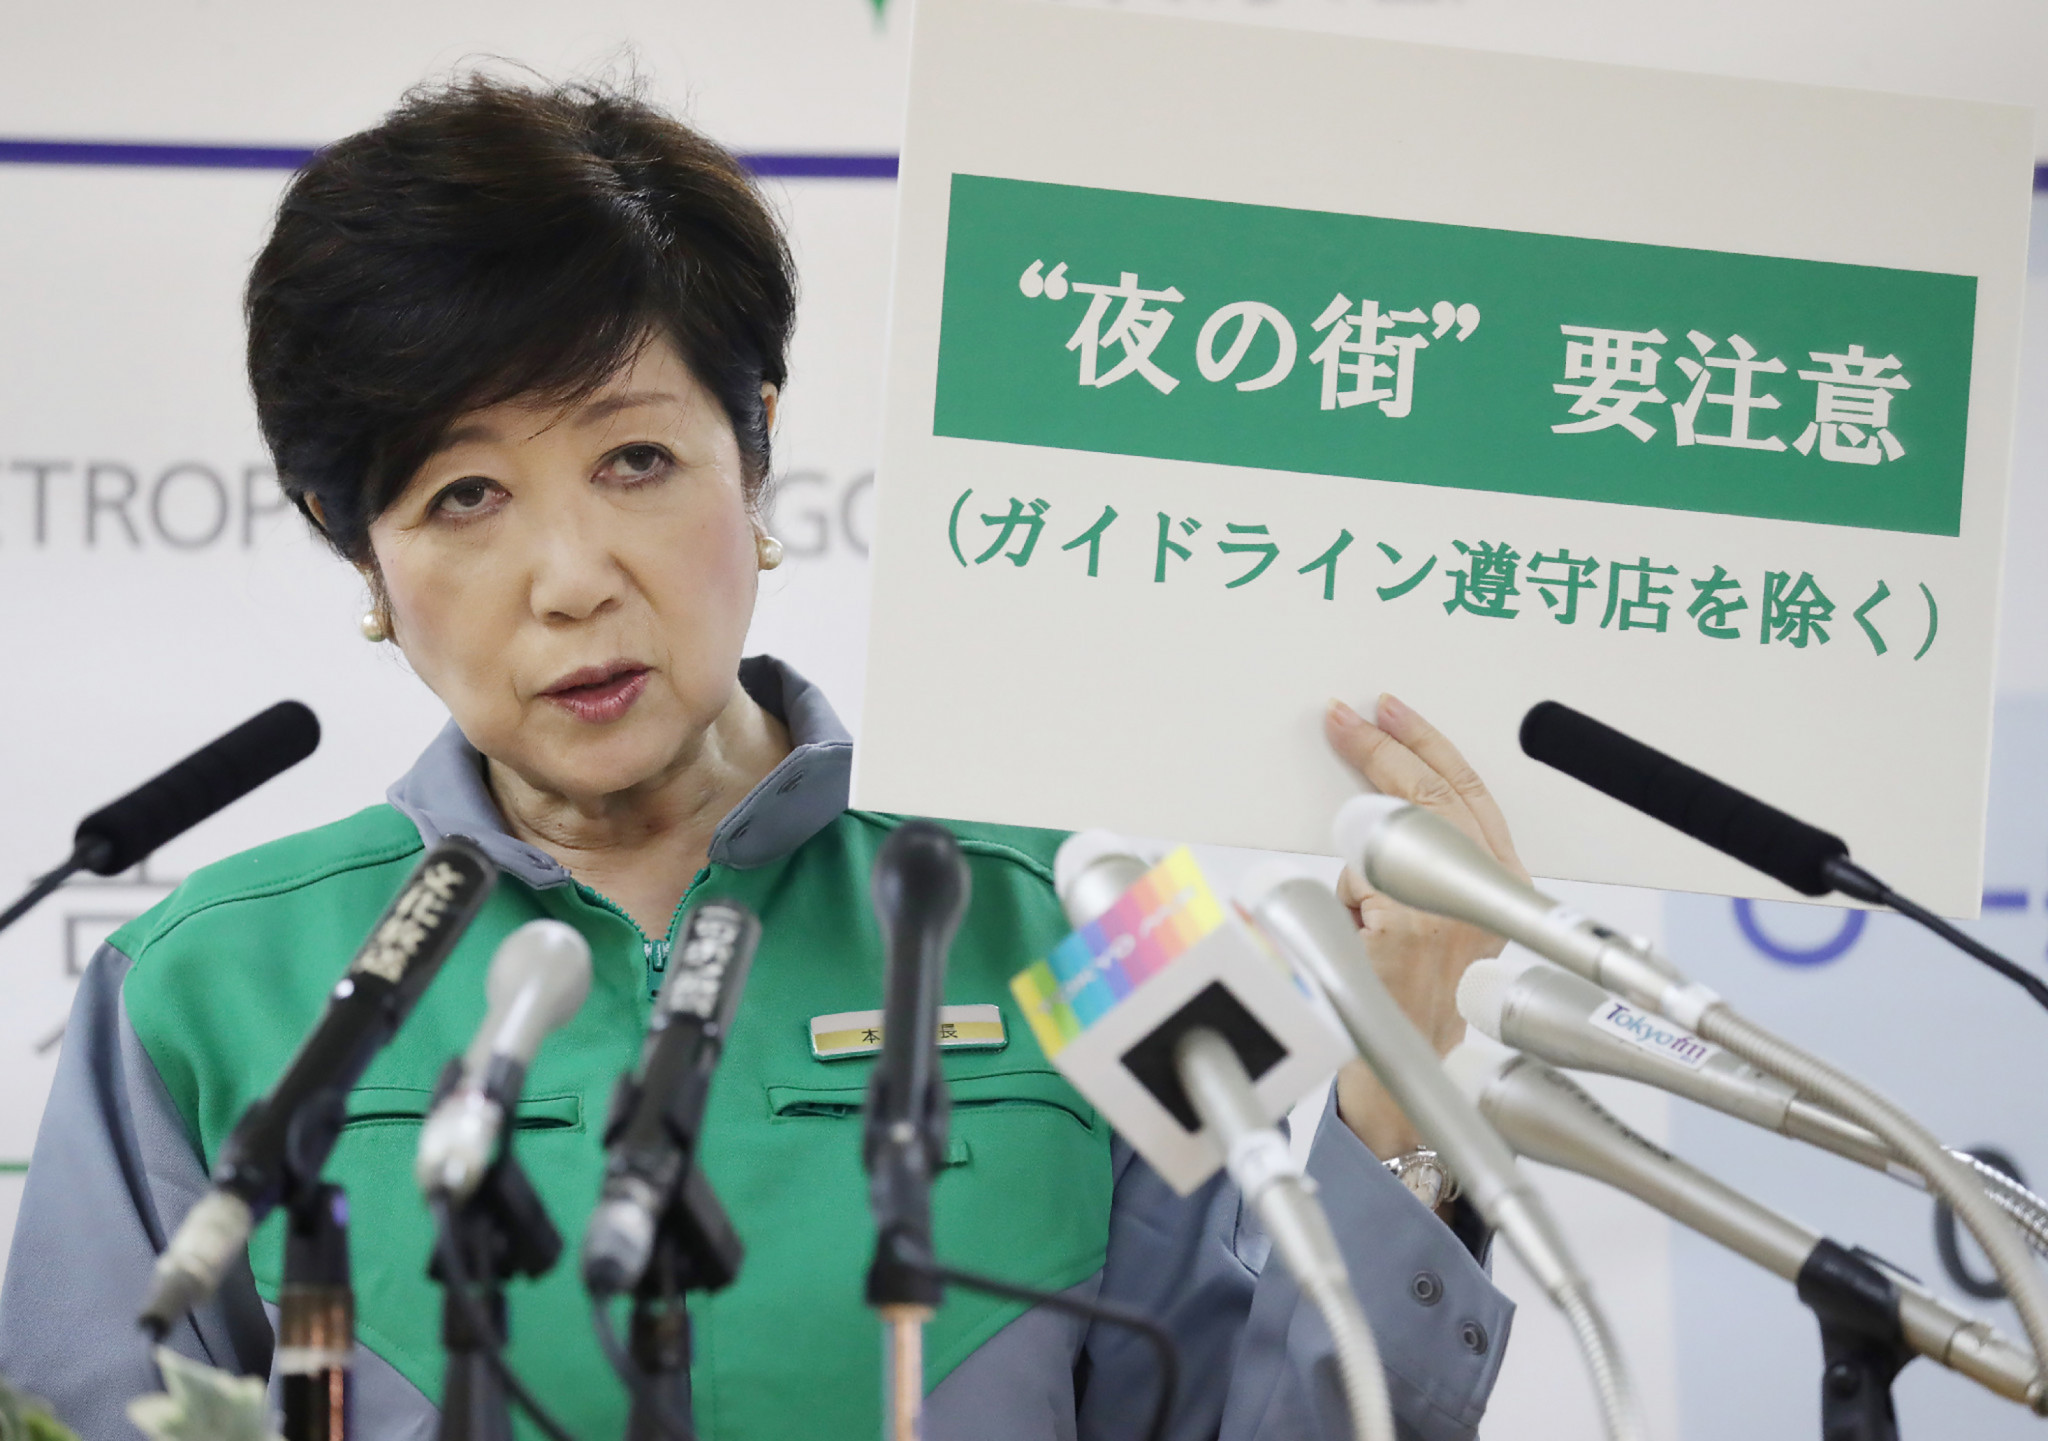 Koike expected to secure second term as Tokyo Governor as voters prepare for polls